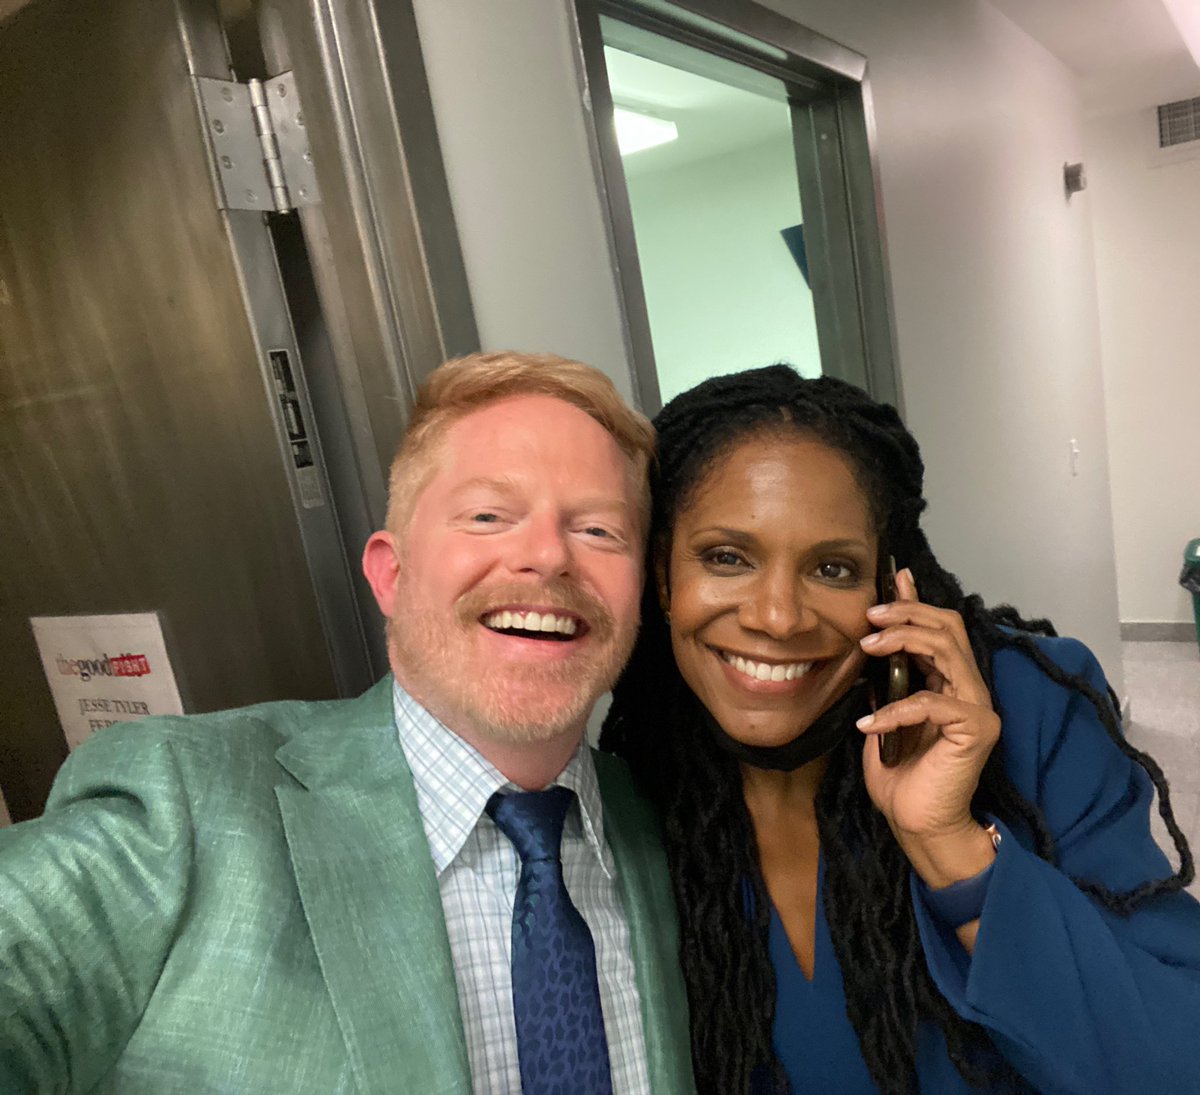 So excited to be working with the talented cast of @thegoodfight. So happy to see @AudraEqualityMc again ❤️🥰 